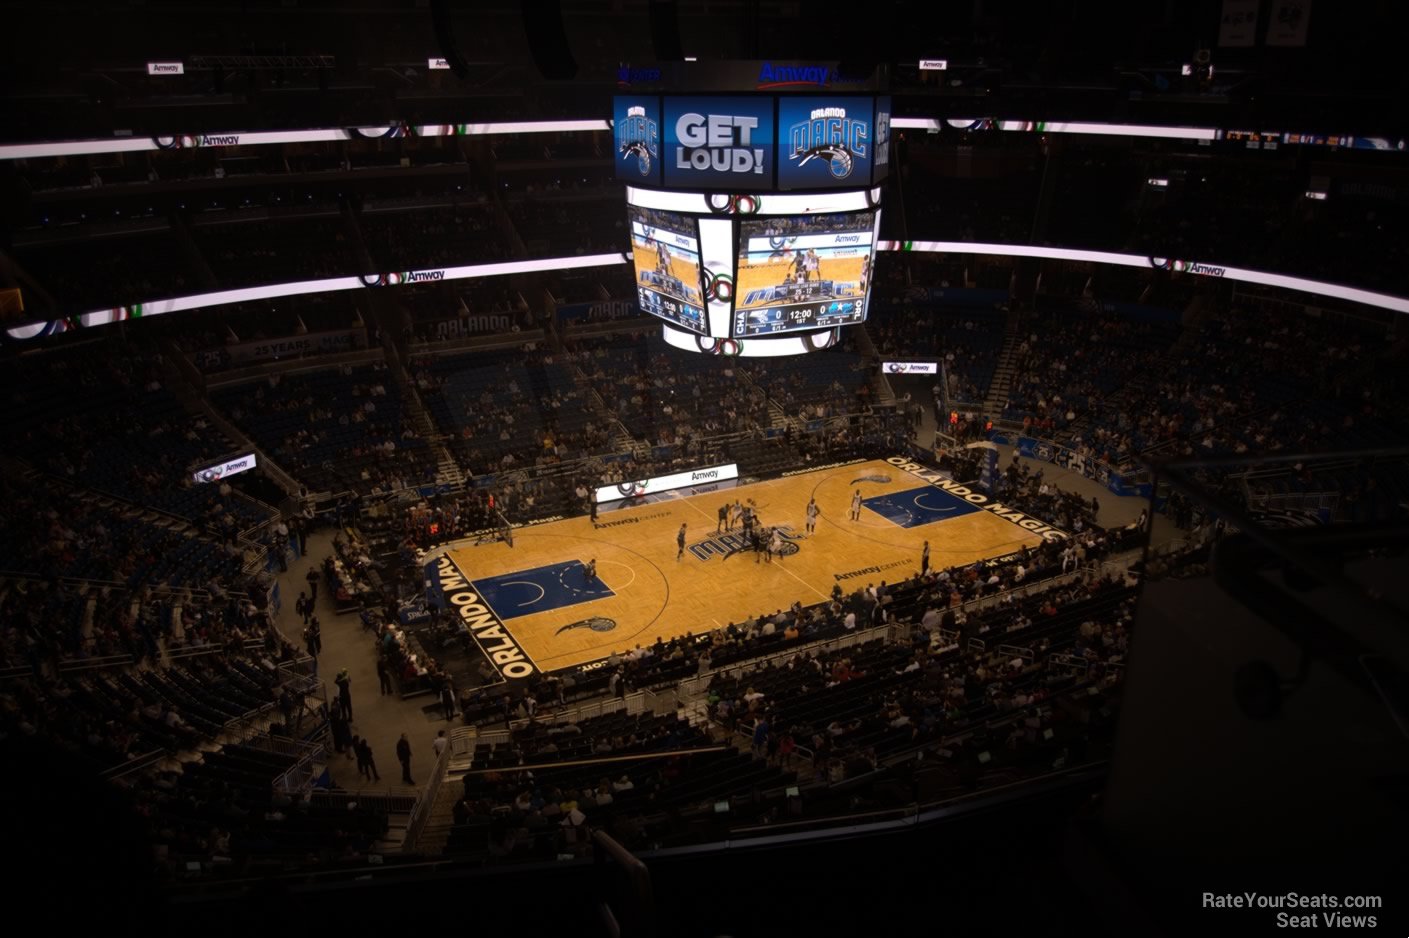 section 228 seat view  for basketball - amway center